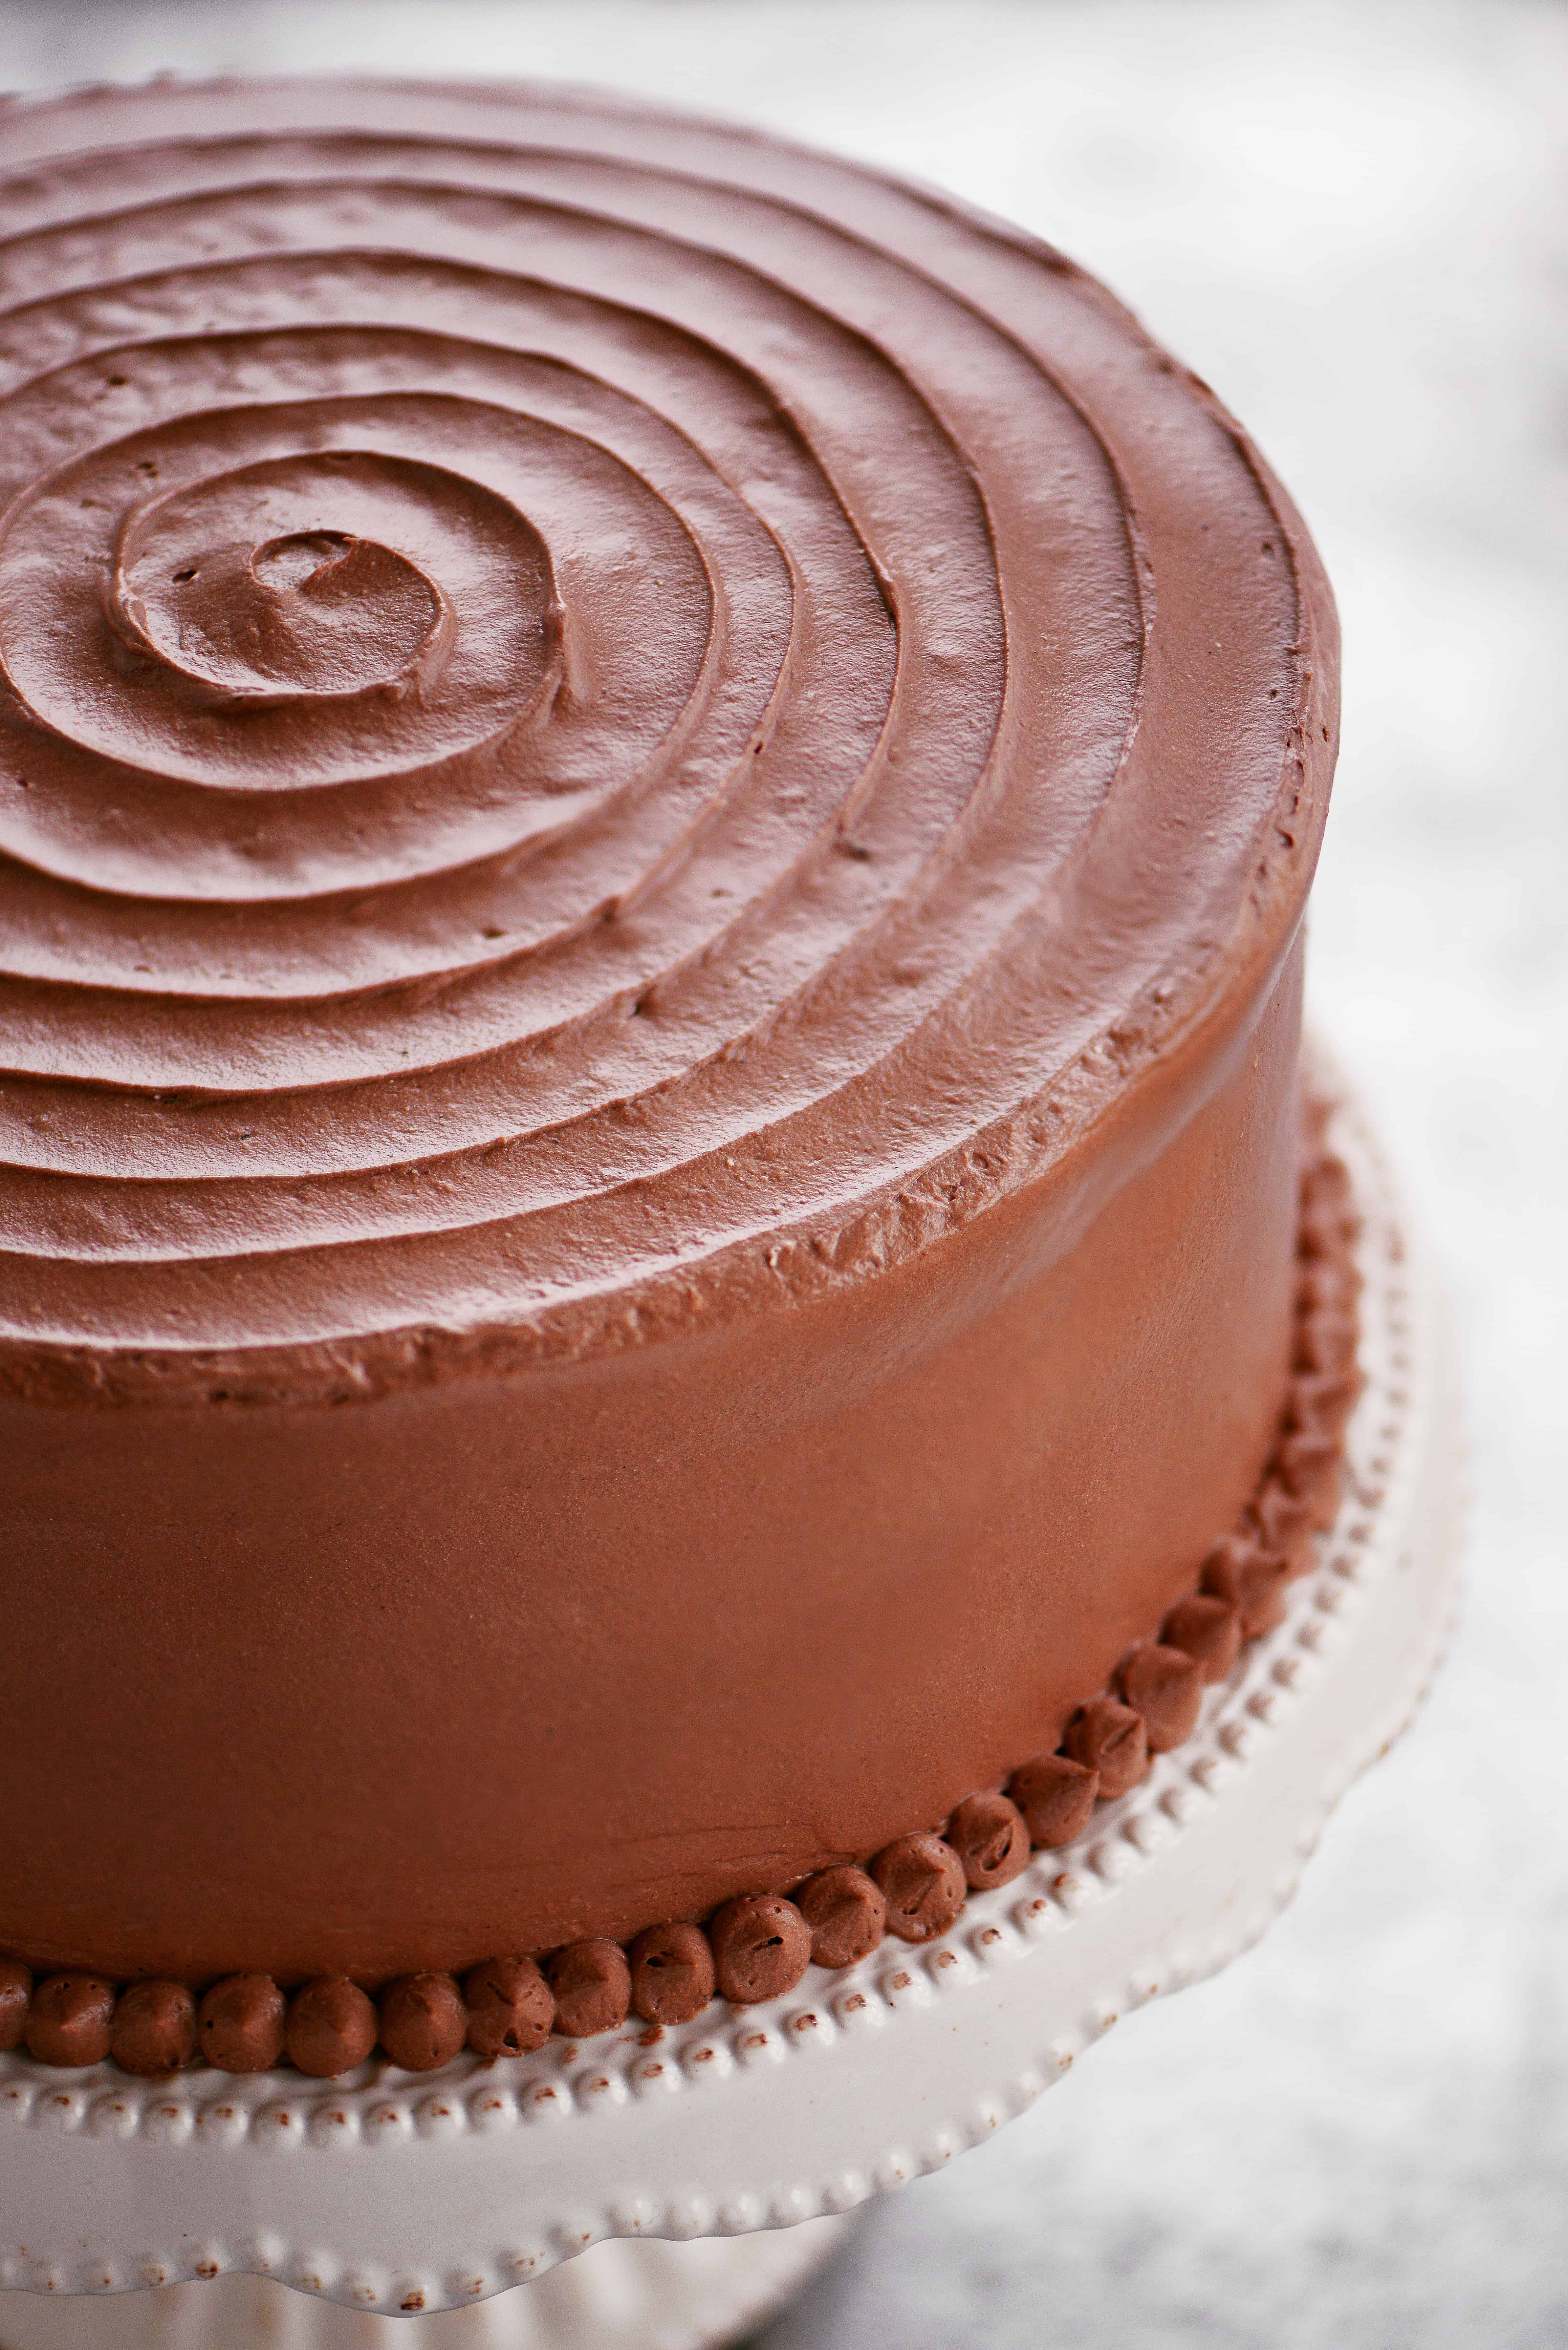 up close of the frosting on the cake